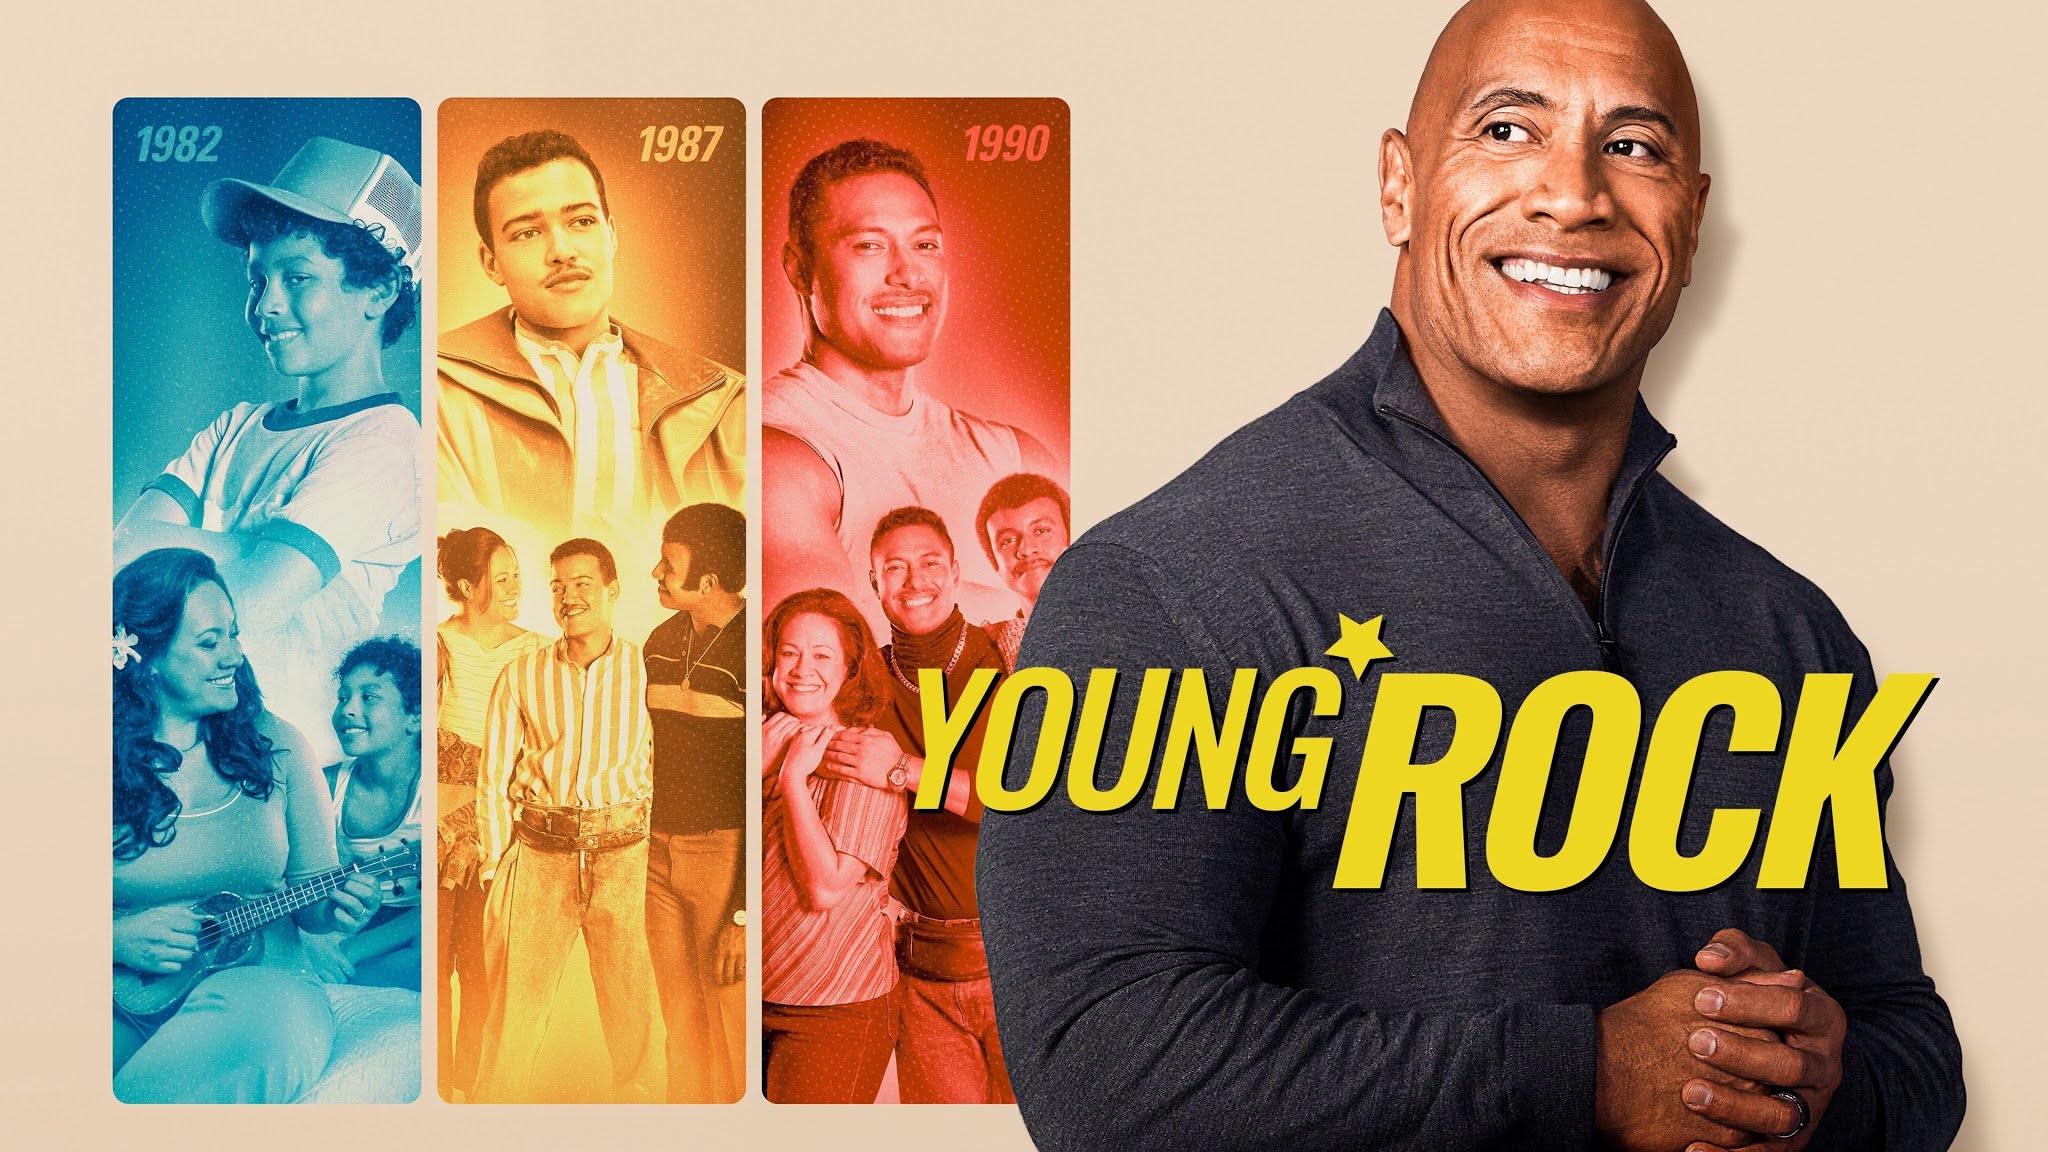 How to watch Young Rock season 1 on NBC from anywhere